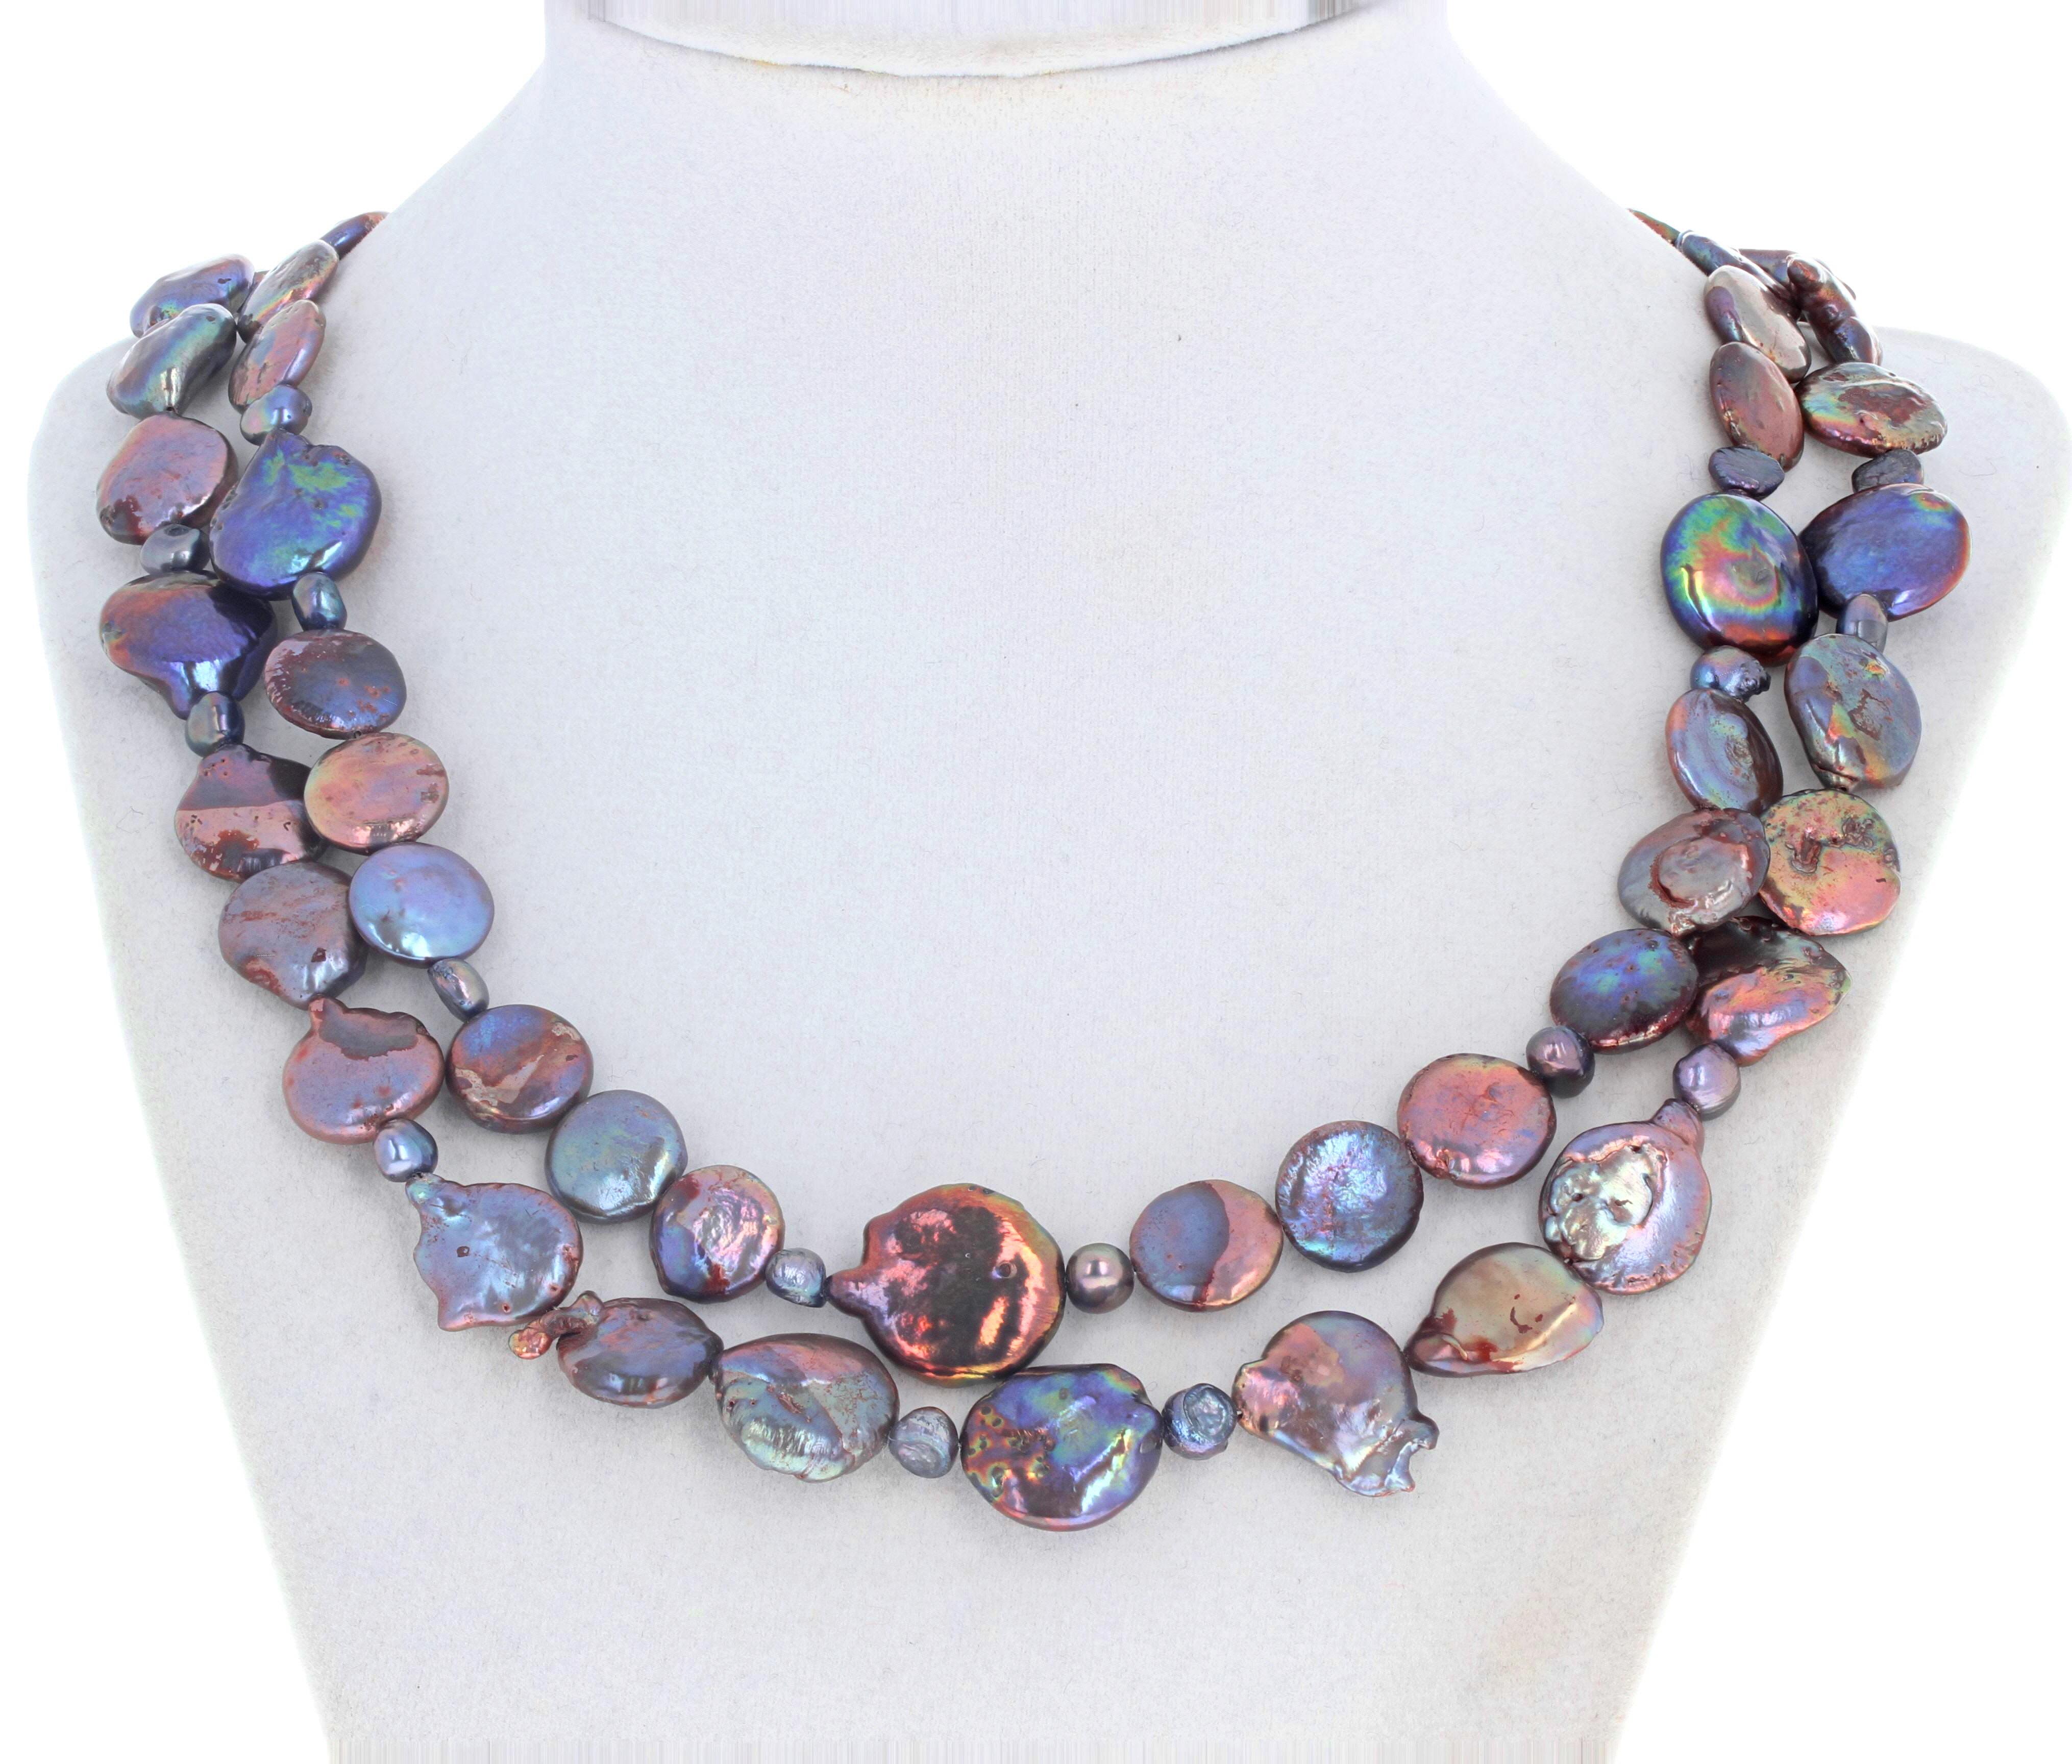 This magnificent eye-catching 18 inch long natural culture Peacock Pearl necklace is a 